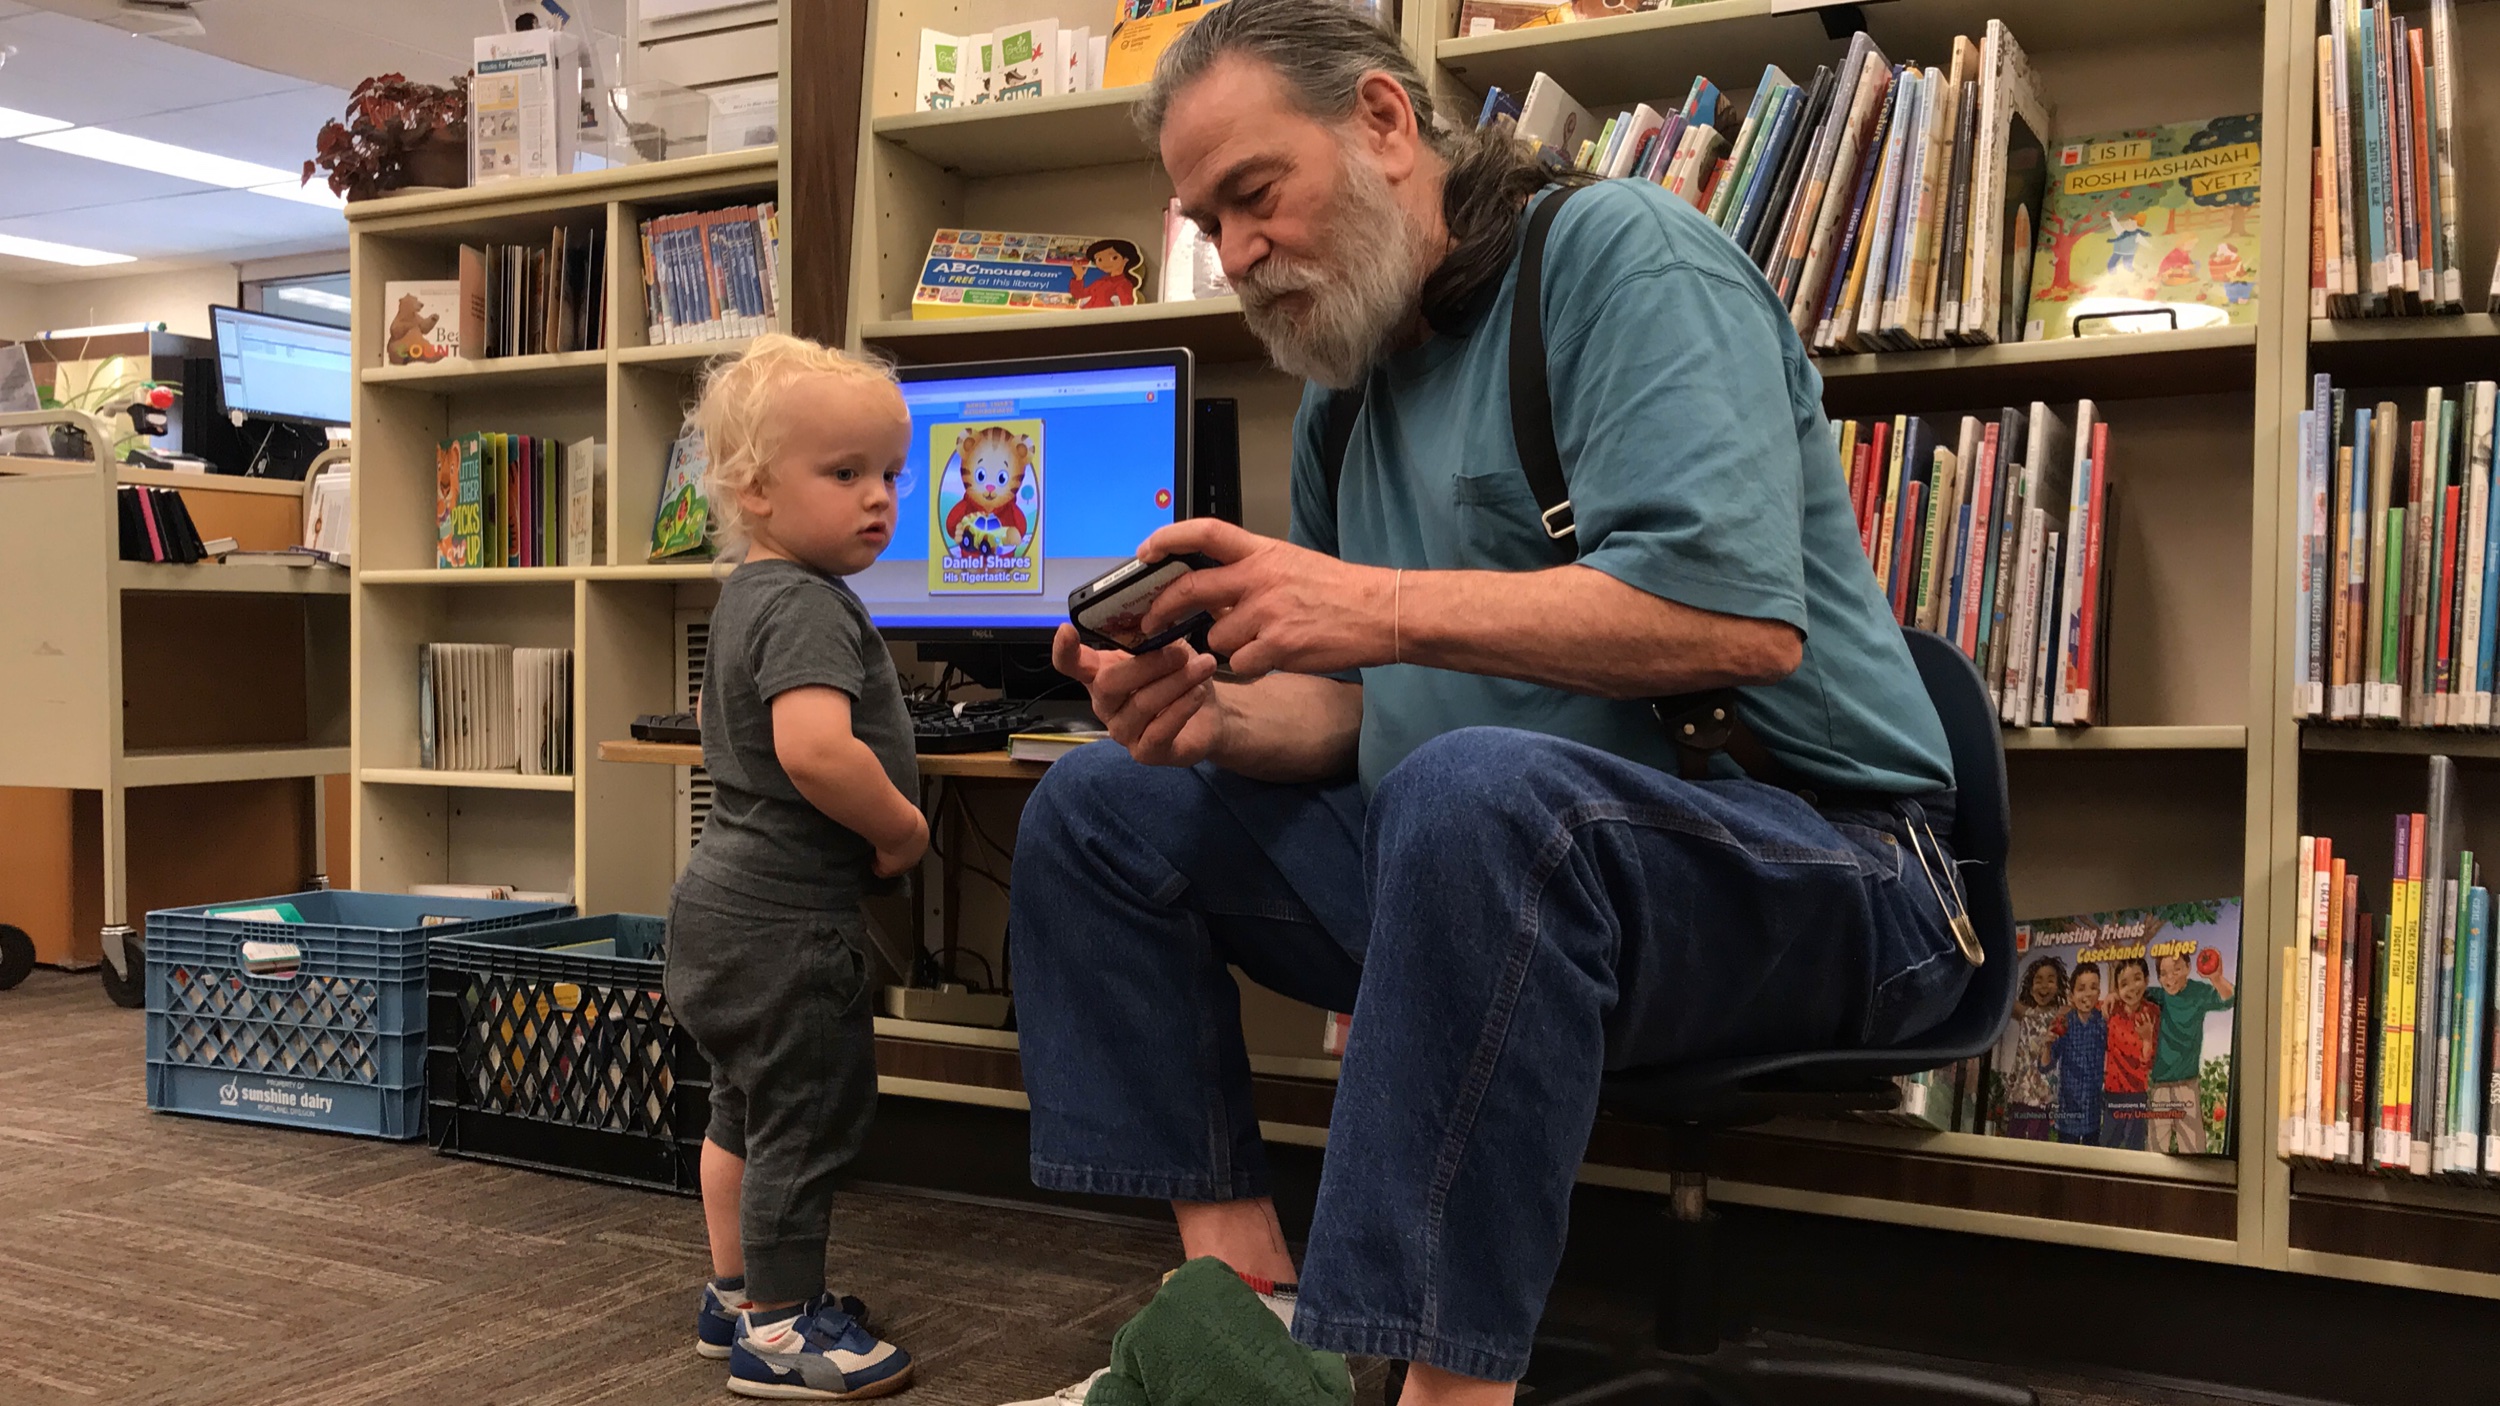 A Washougal Community Library worker with a burly beard assists a toddler-age male patron in the children’s section.